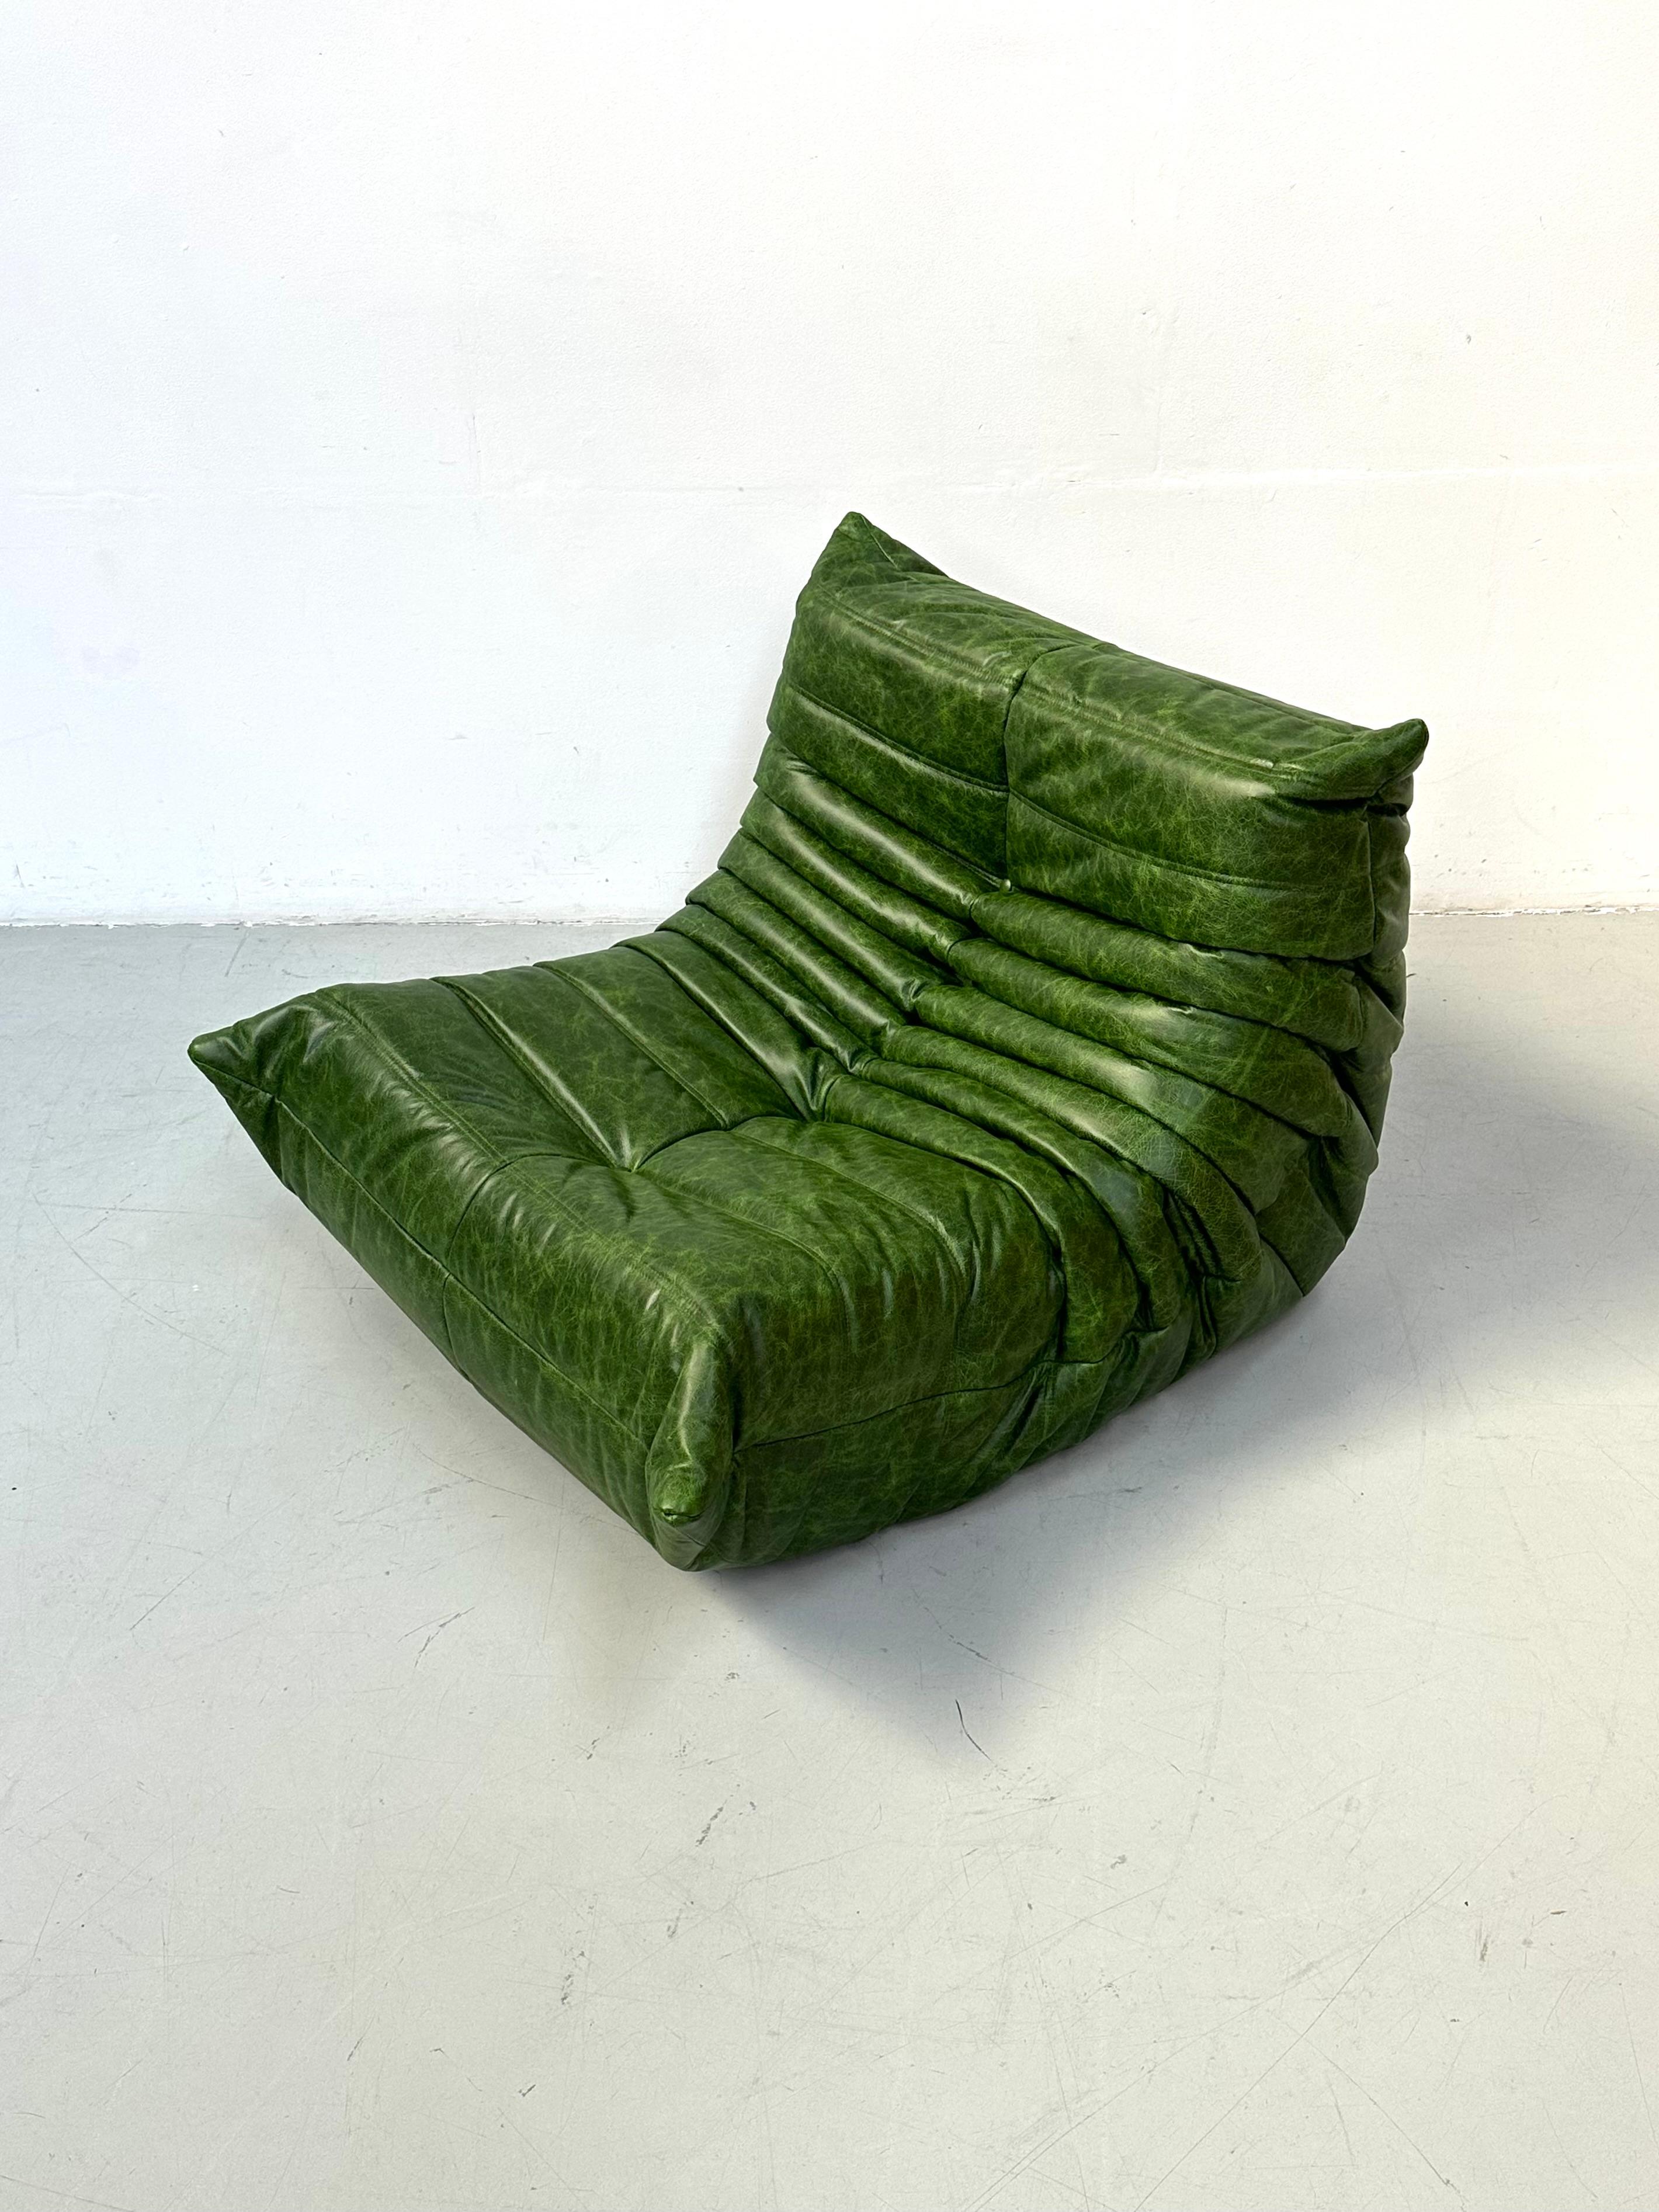 20th Century Vintage Togo Chair in Forest Green Leather by Michel Ducaroy for Ligne Roset.